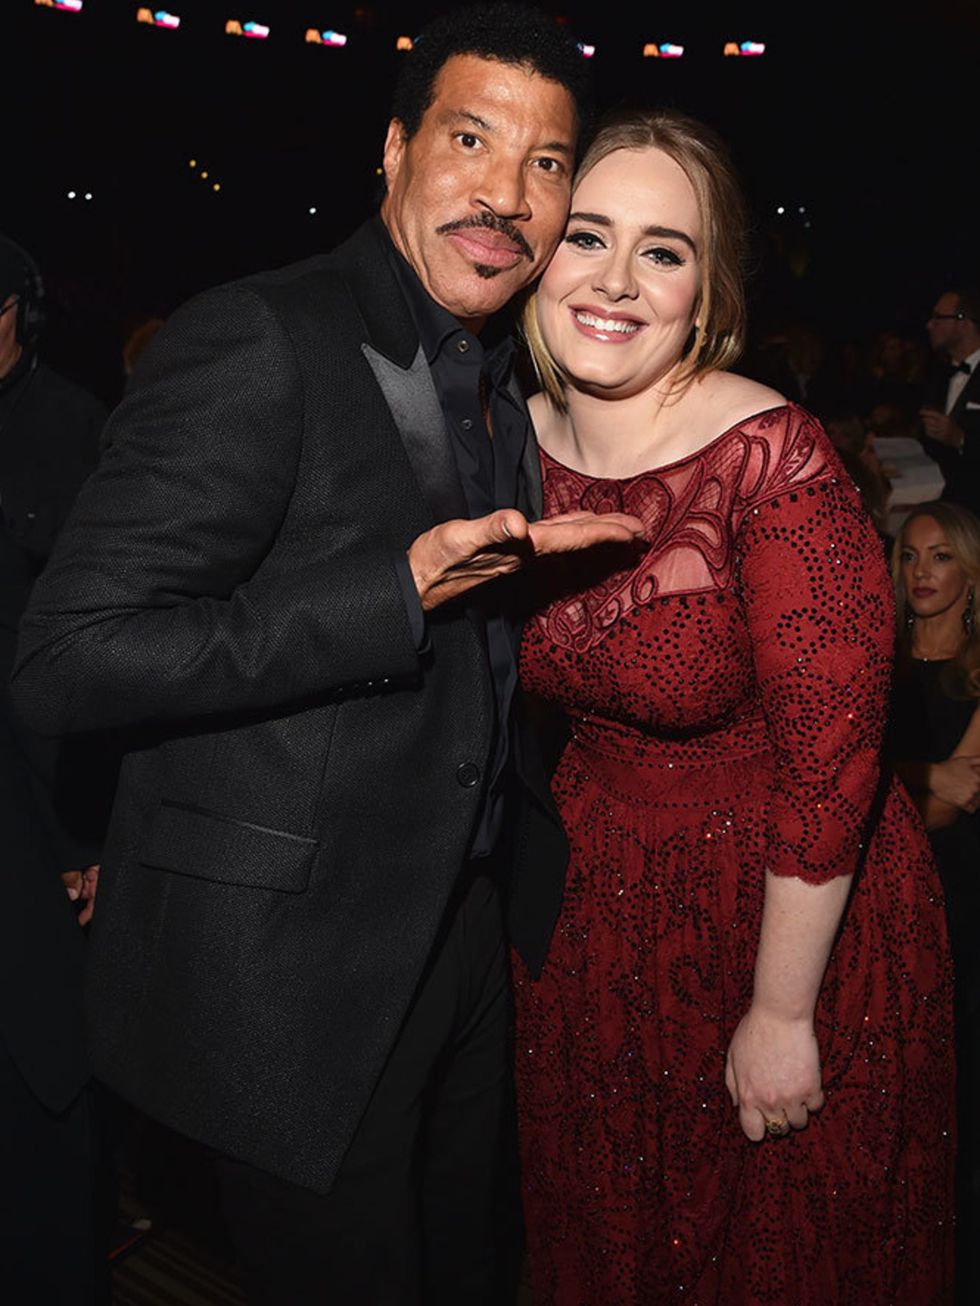 Lionel Richie and Adele